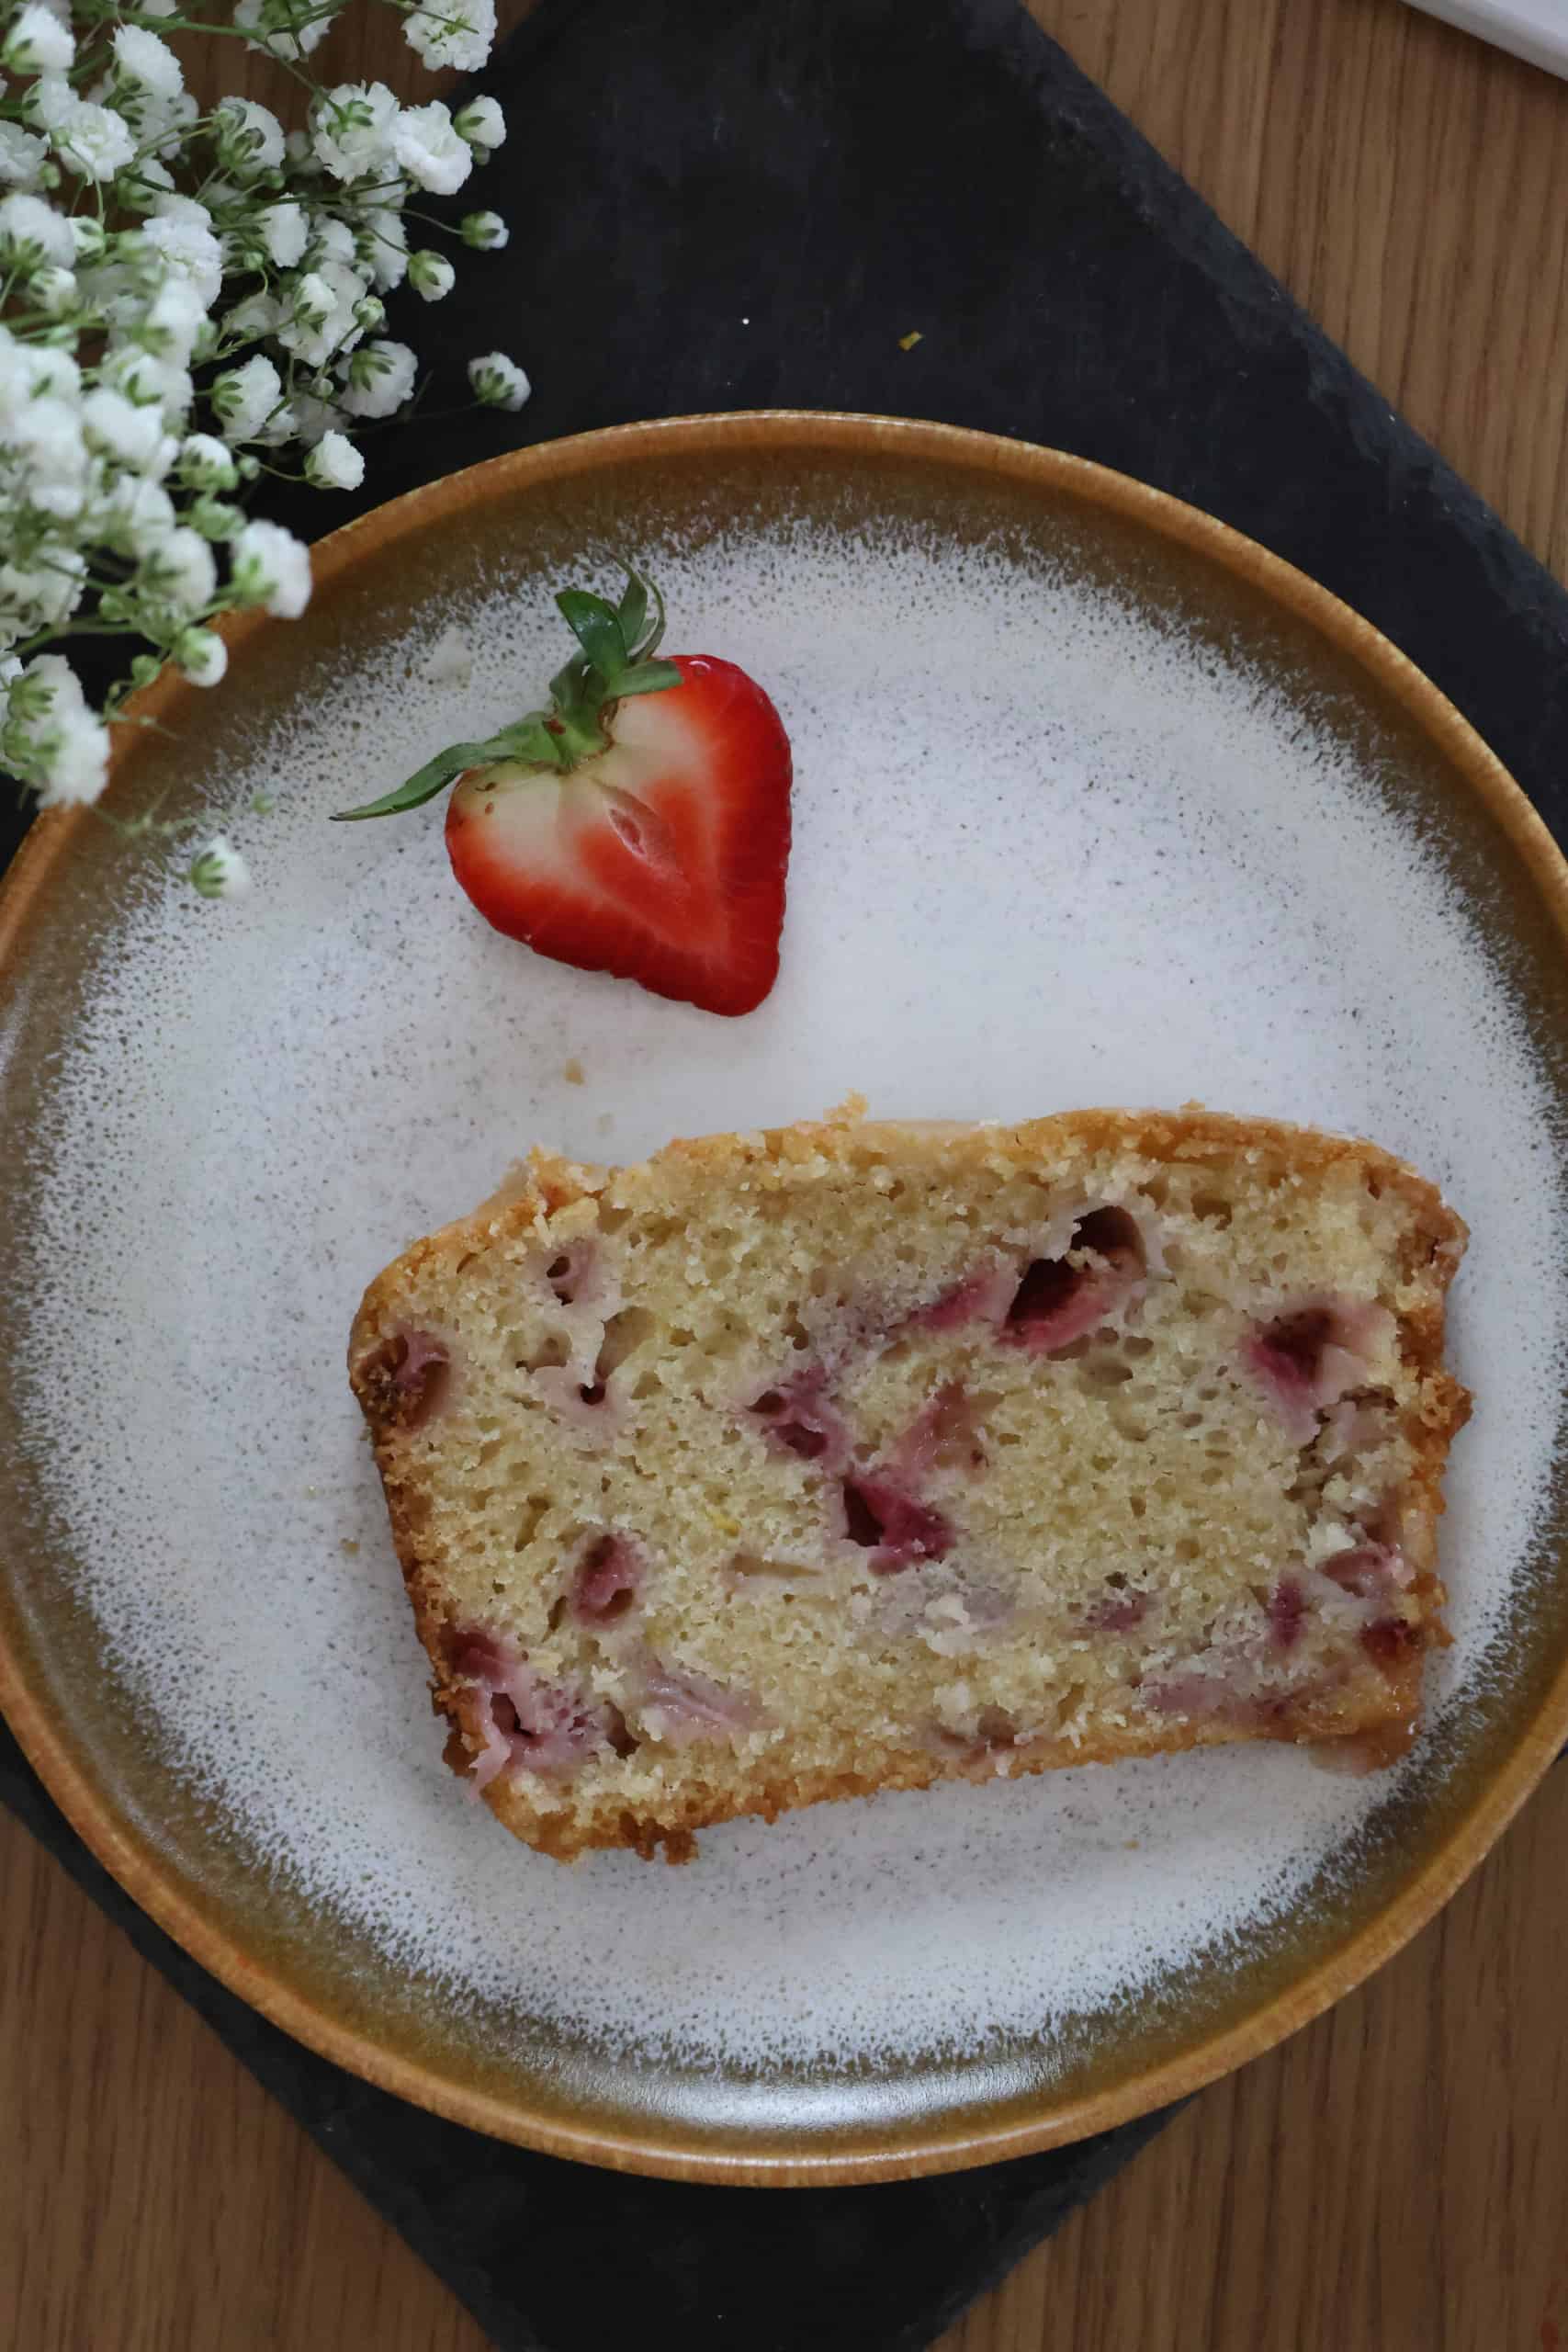 Our easy, eggfree strawberry pound cake is a homemade treat perfect for your next tea party, laid-back brunch, or whenever that sweet tooth tickles your tastebuds. Sharing the secrets to a perfectly moist crumb, perfect glazing plus tips to make a flawless crack free cake. Let's dive into creating this berrylicious delight that'll make you the talk of town!